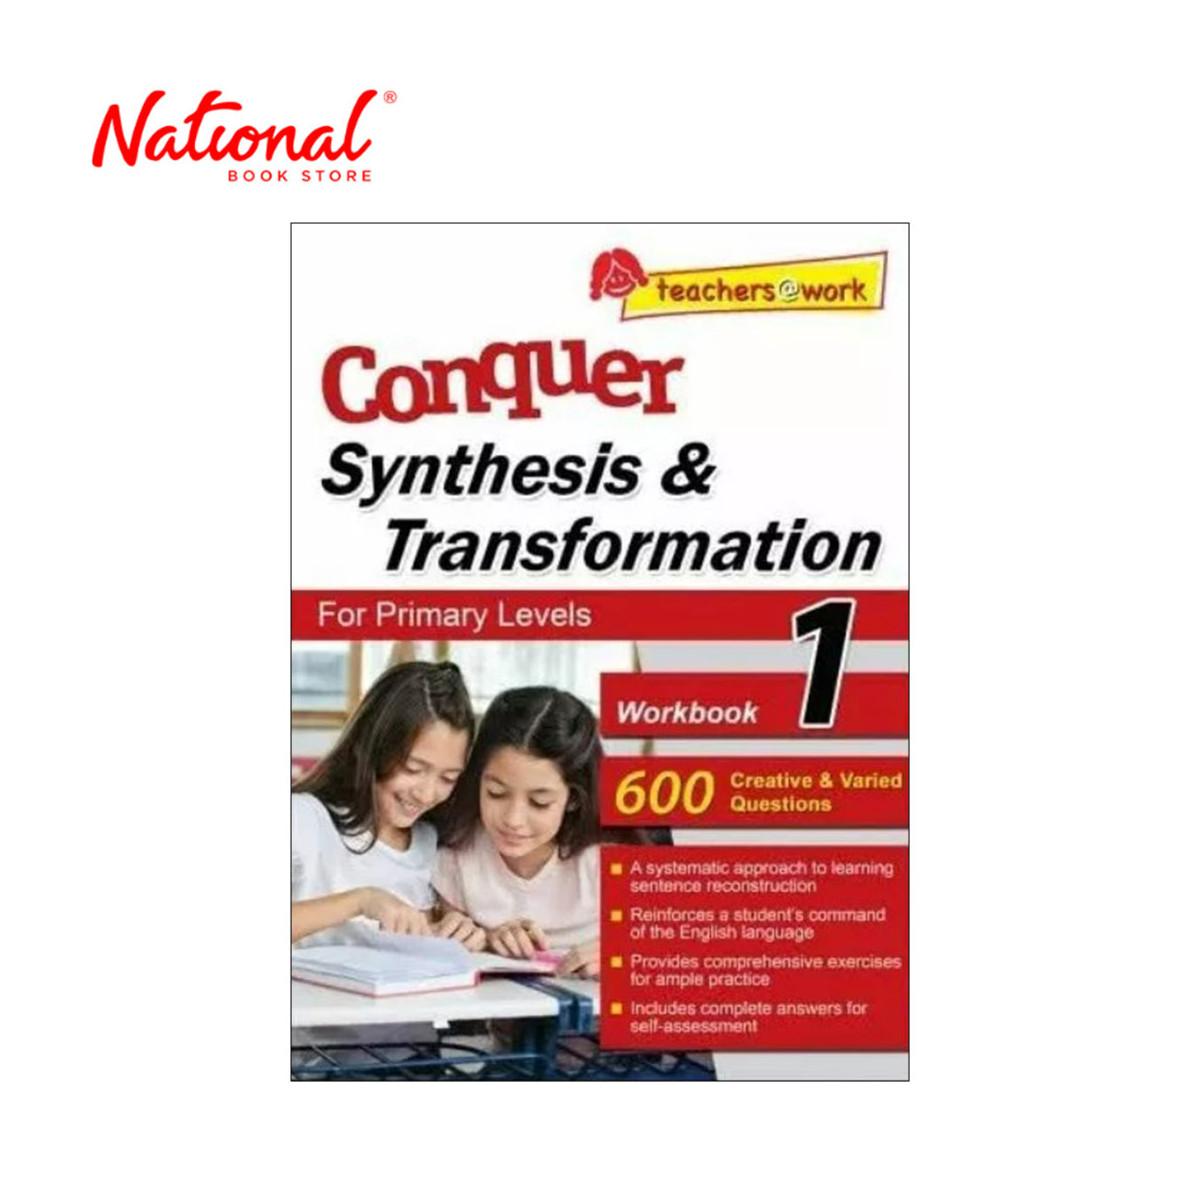 Conquer: Synthesis & Transformation for Primary Levels Workbook 1 by J. Lee - Trade Paperback